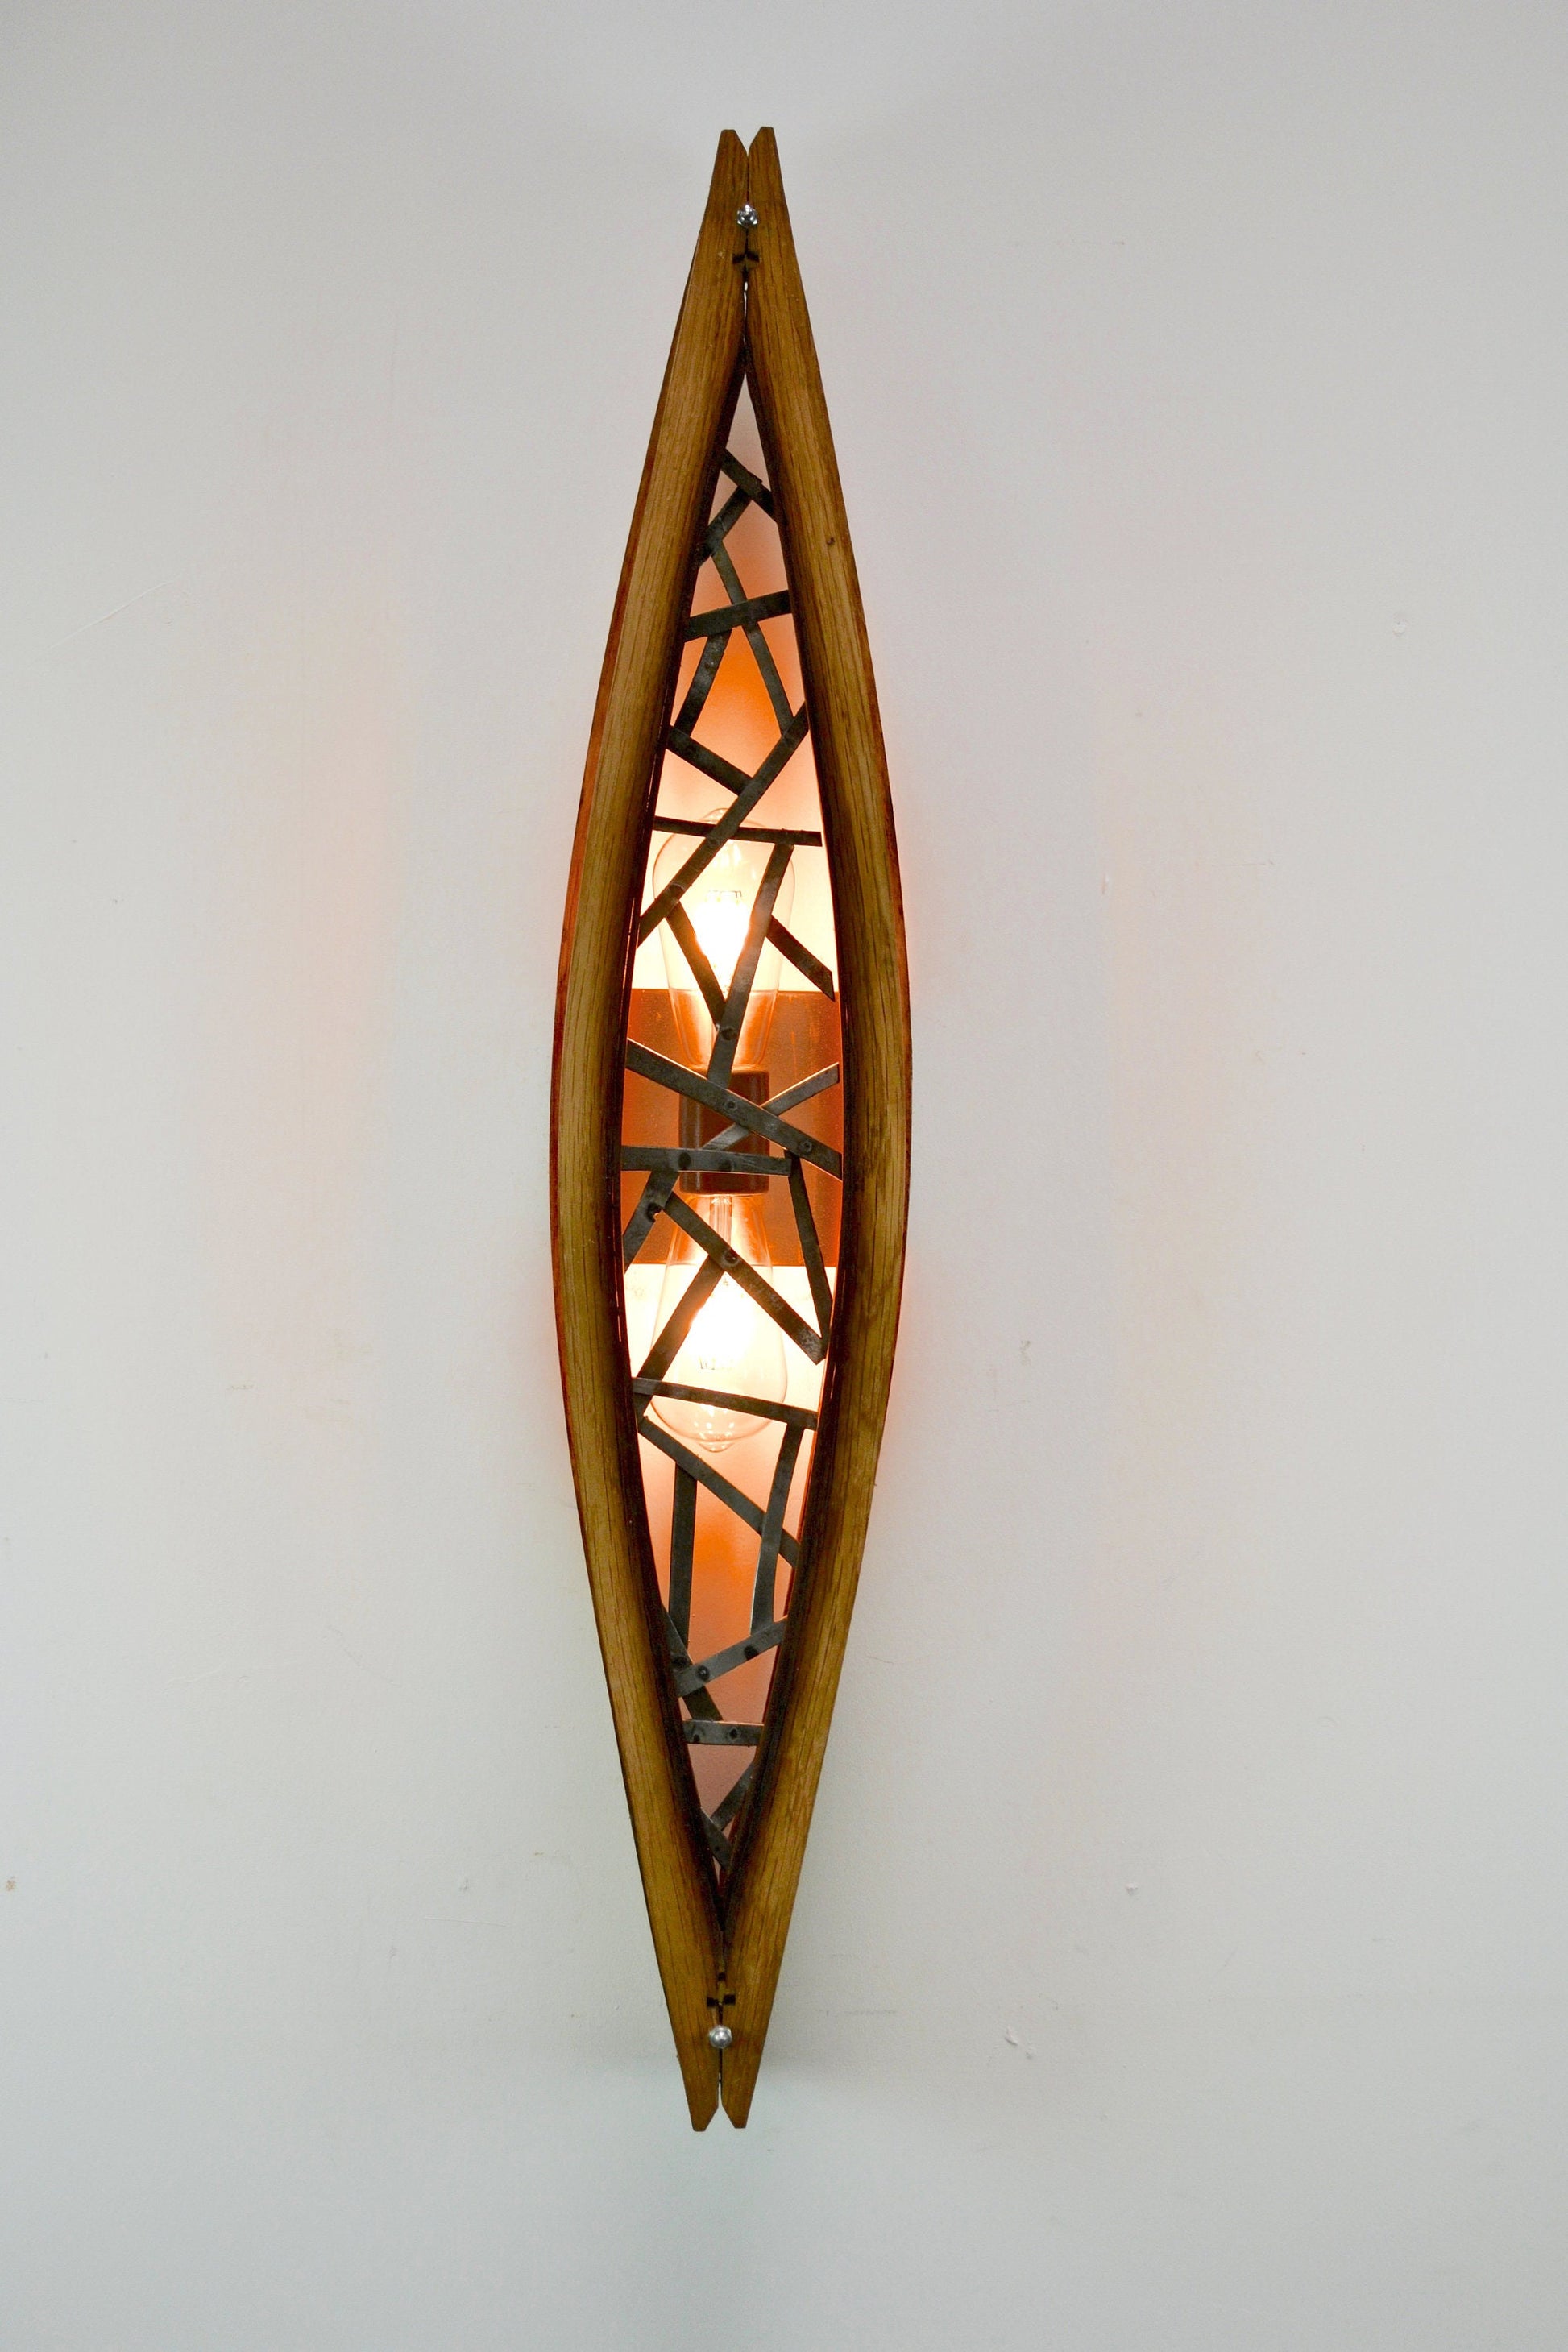 Wine Barrel Wall Sconce - Rawak - Made from retired California wine barrels 100% Recycled!